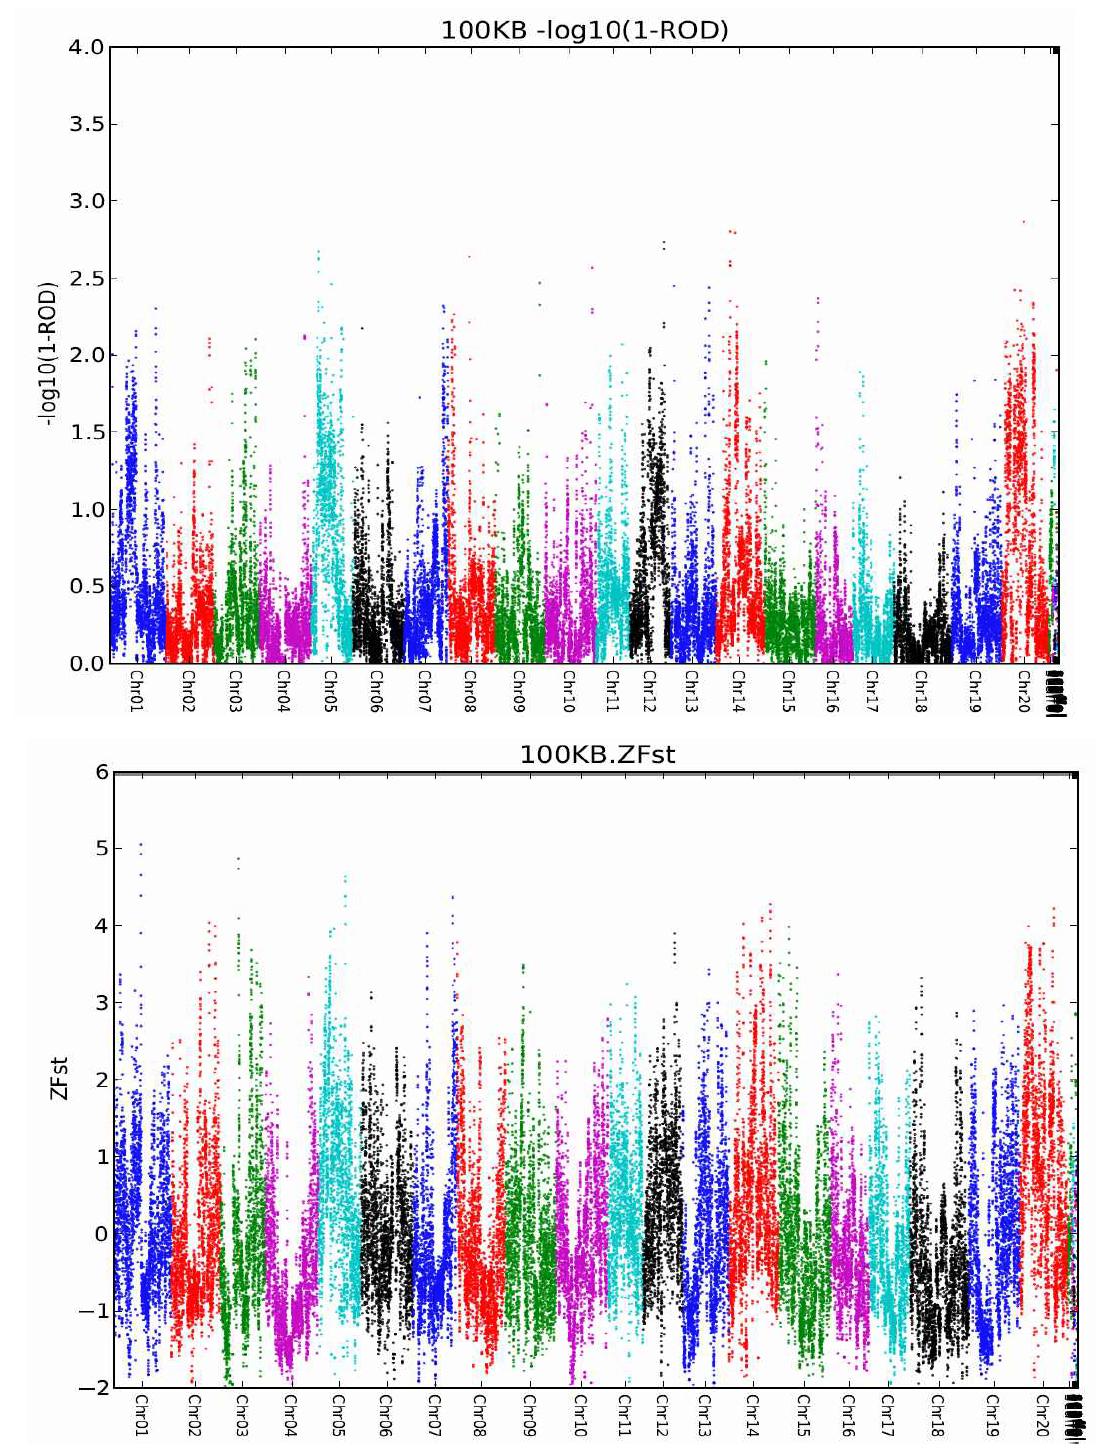 Genome-wide analysis of nucleotide diversity and selection. ROD and Fst for cultivated relative to wild soybeans across 20 soybean chromosomes are presented.